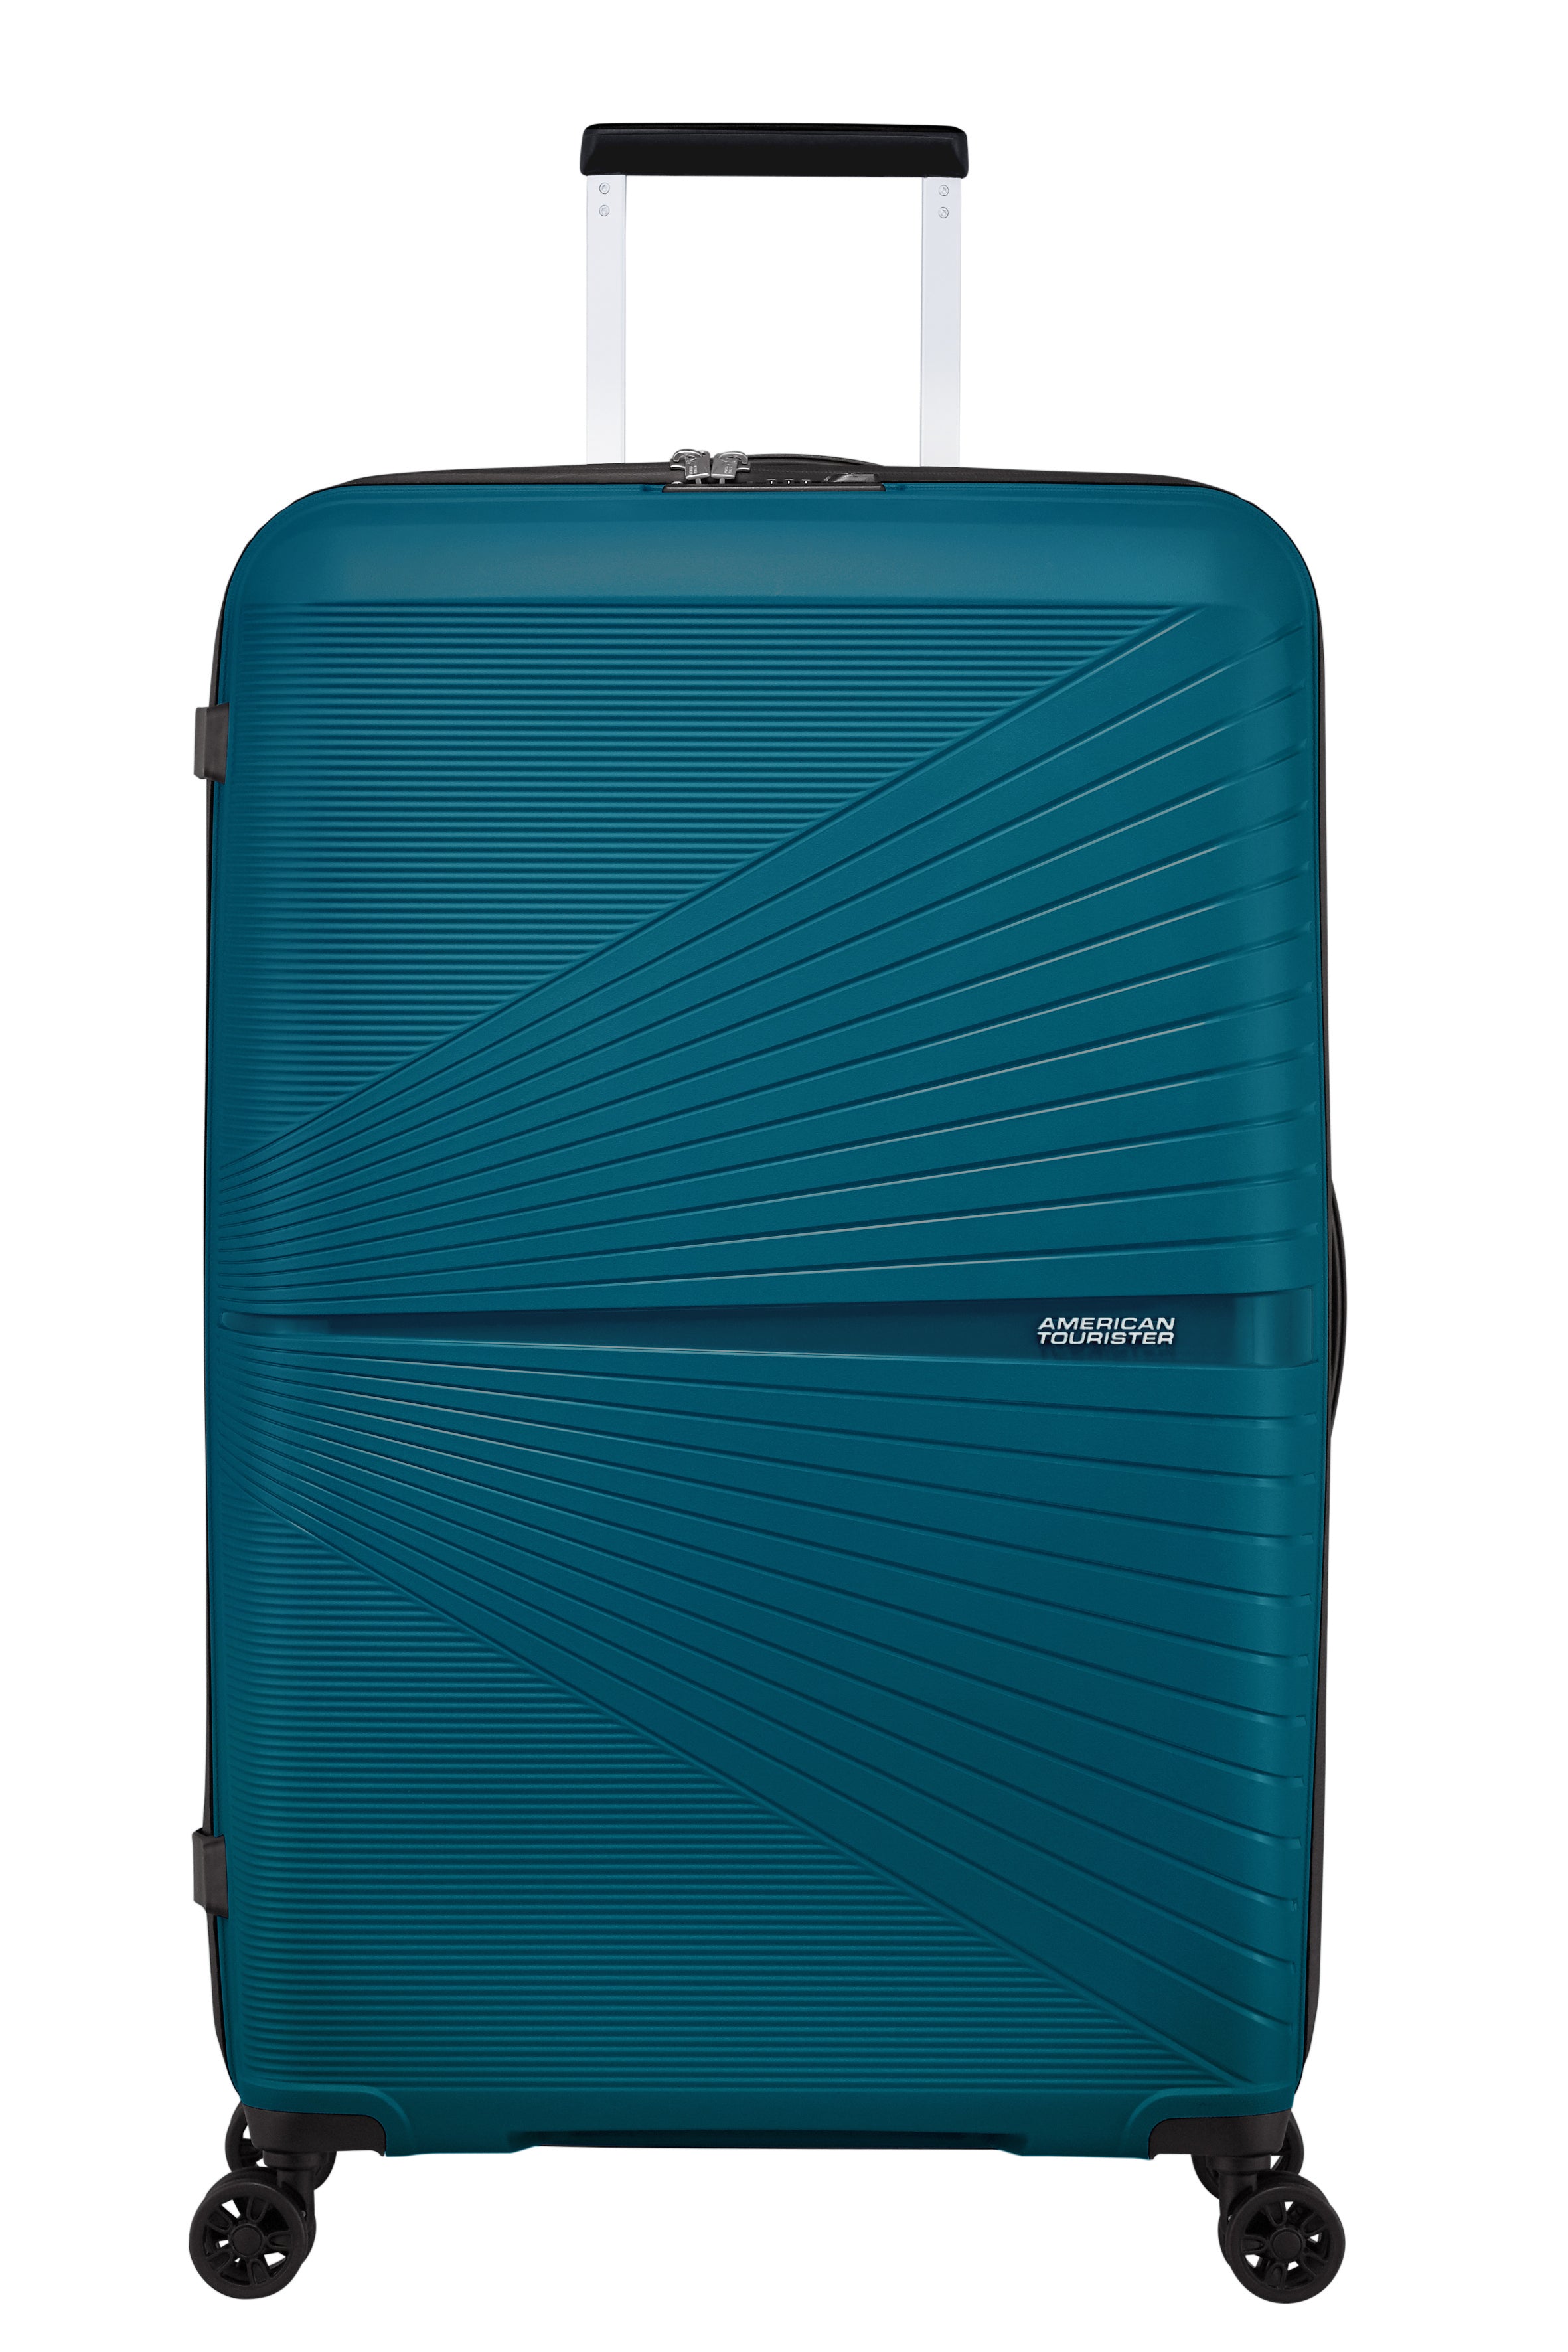 American Tourister - Airconic 77cm Large Suitcase - Deep Ocean-2